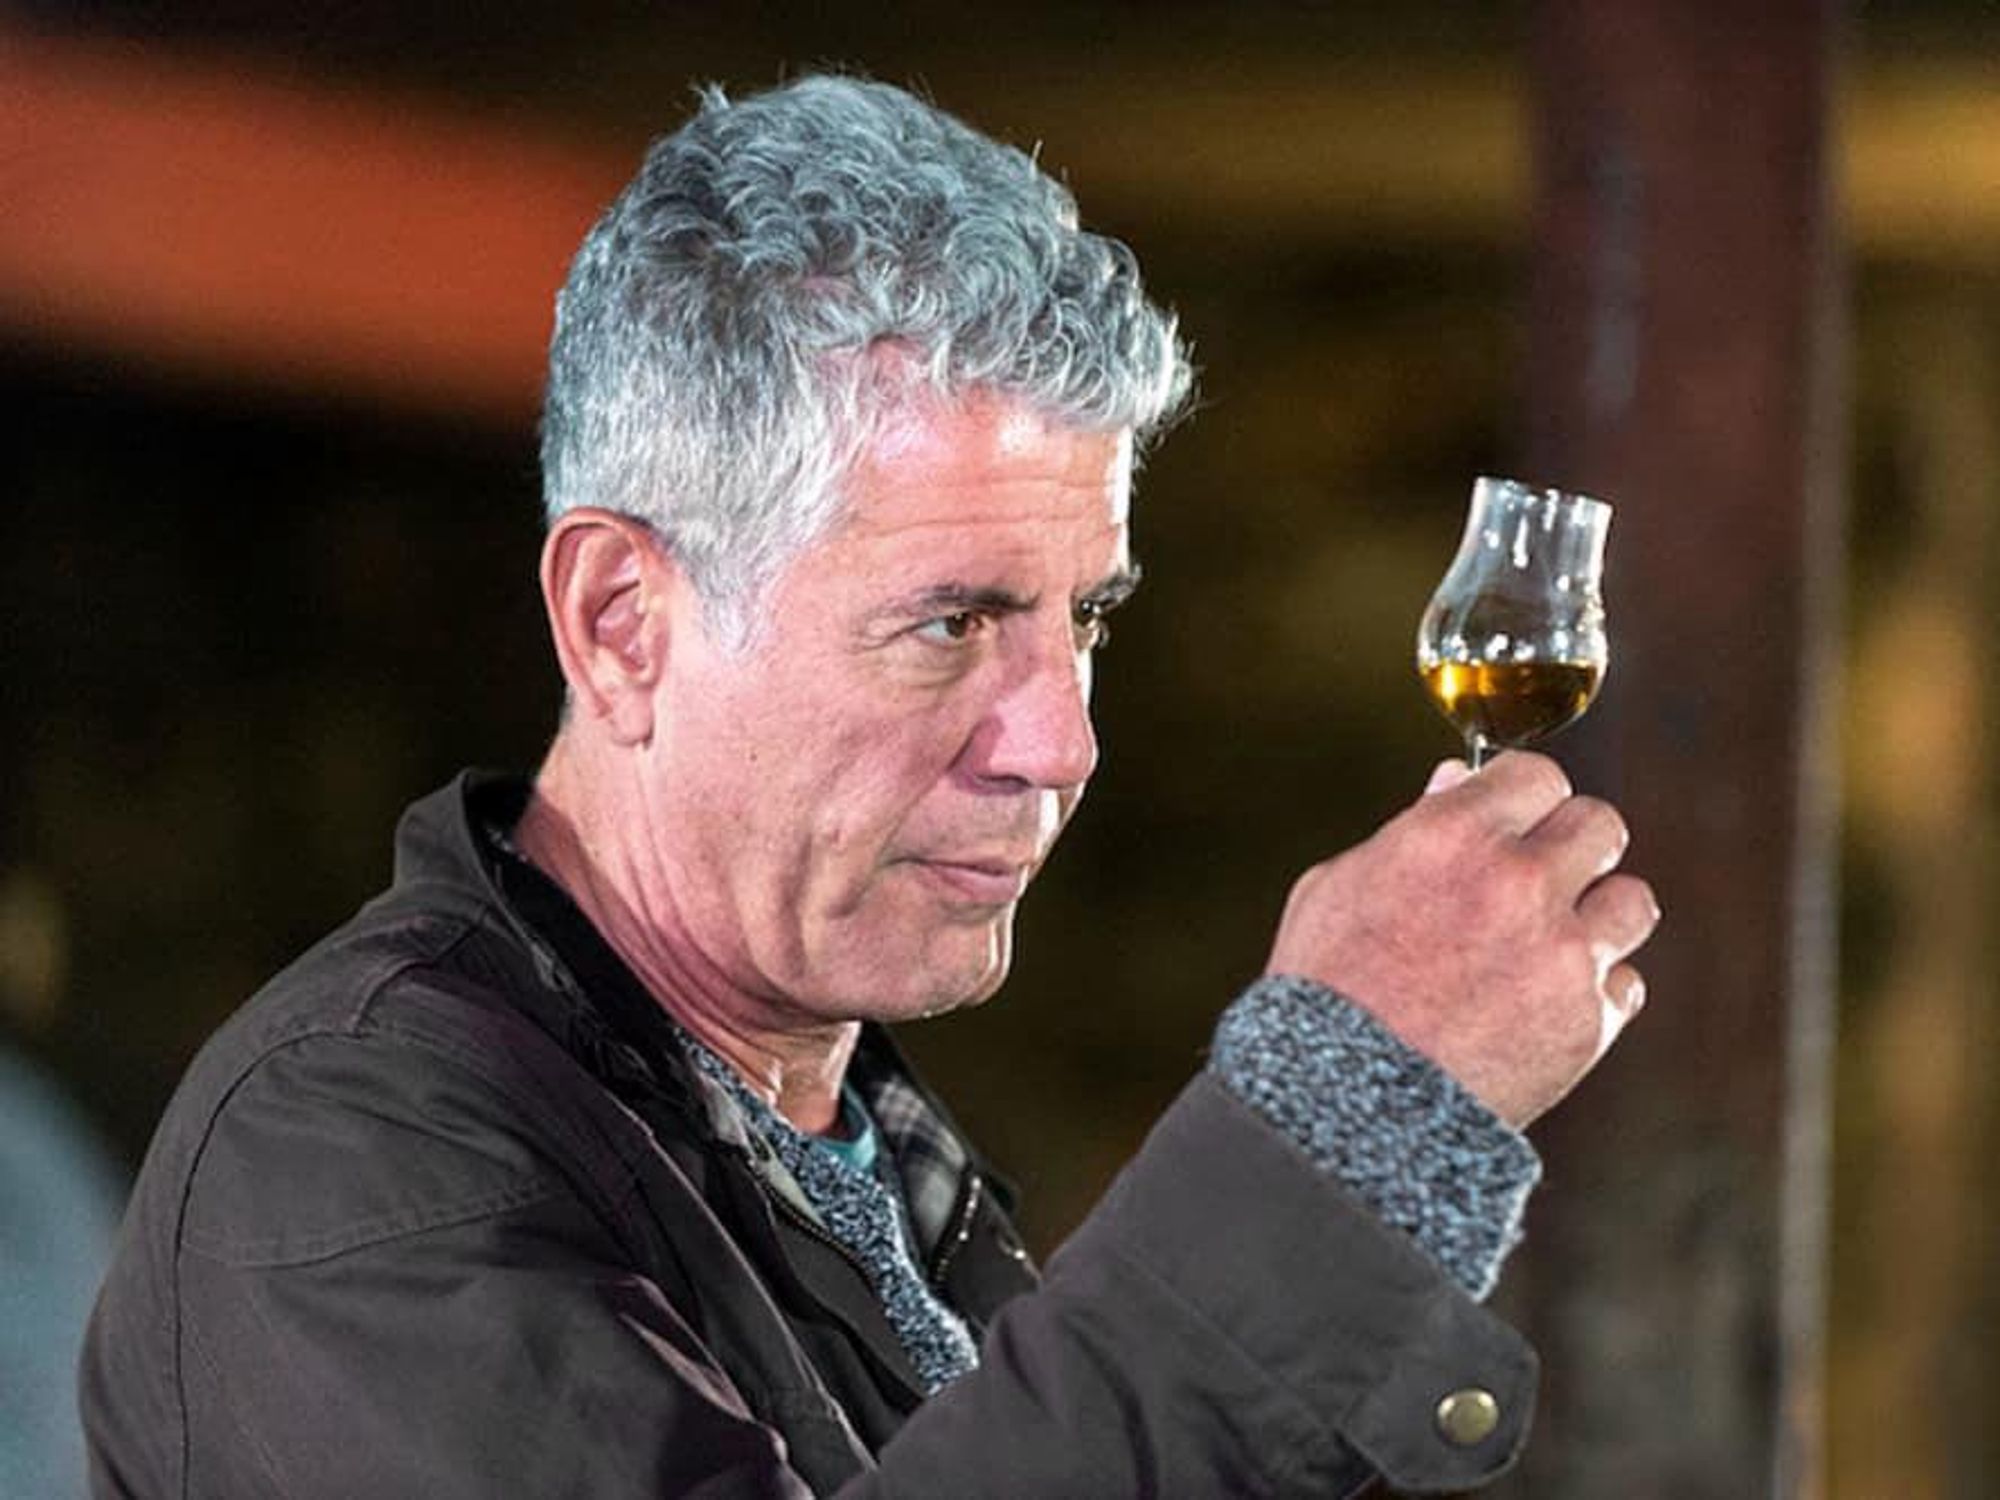 Experience the Balvenie Rare Craft Collection curated by Anthony Bourdain